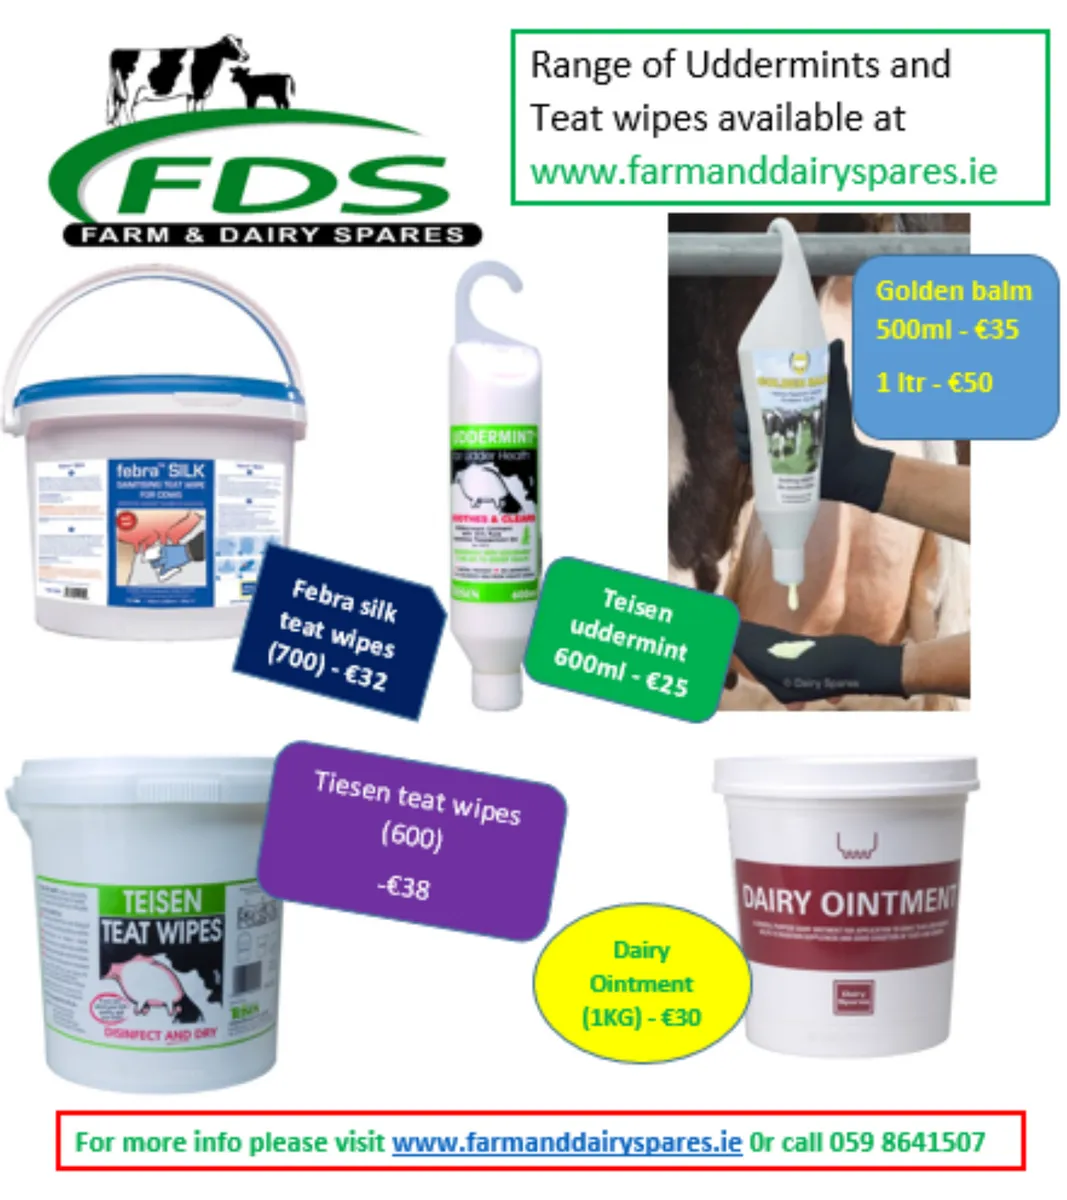 Teat wipes and uddermint for sale at FDS - Image 1